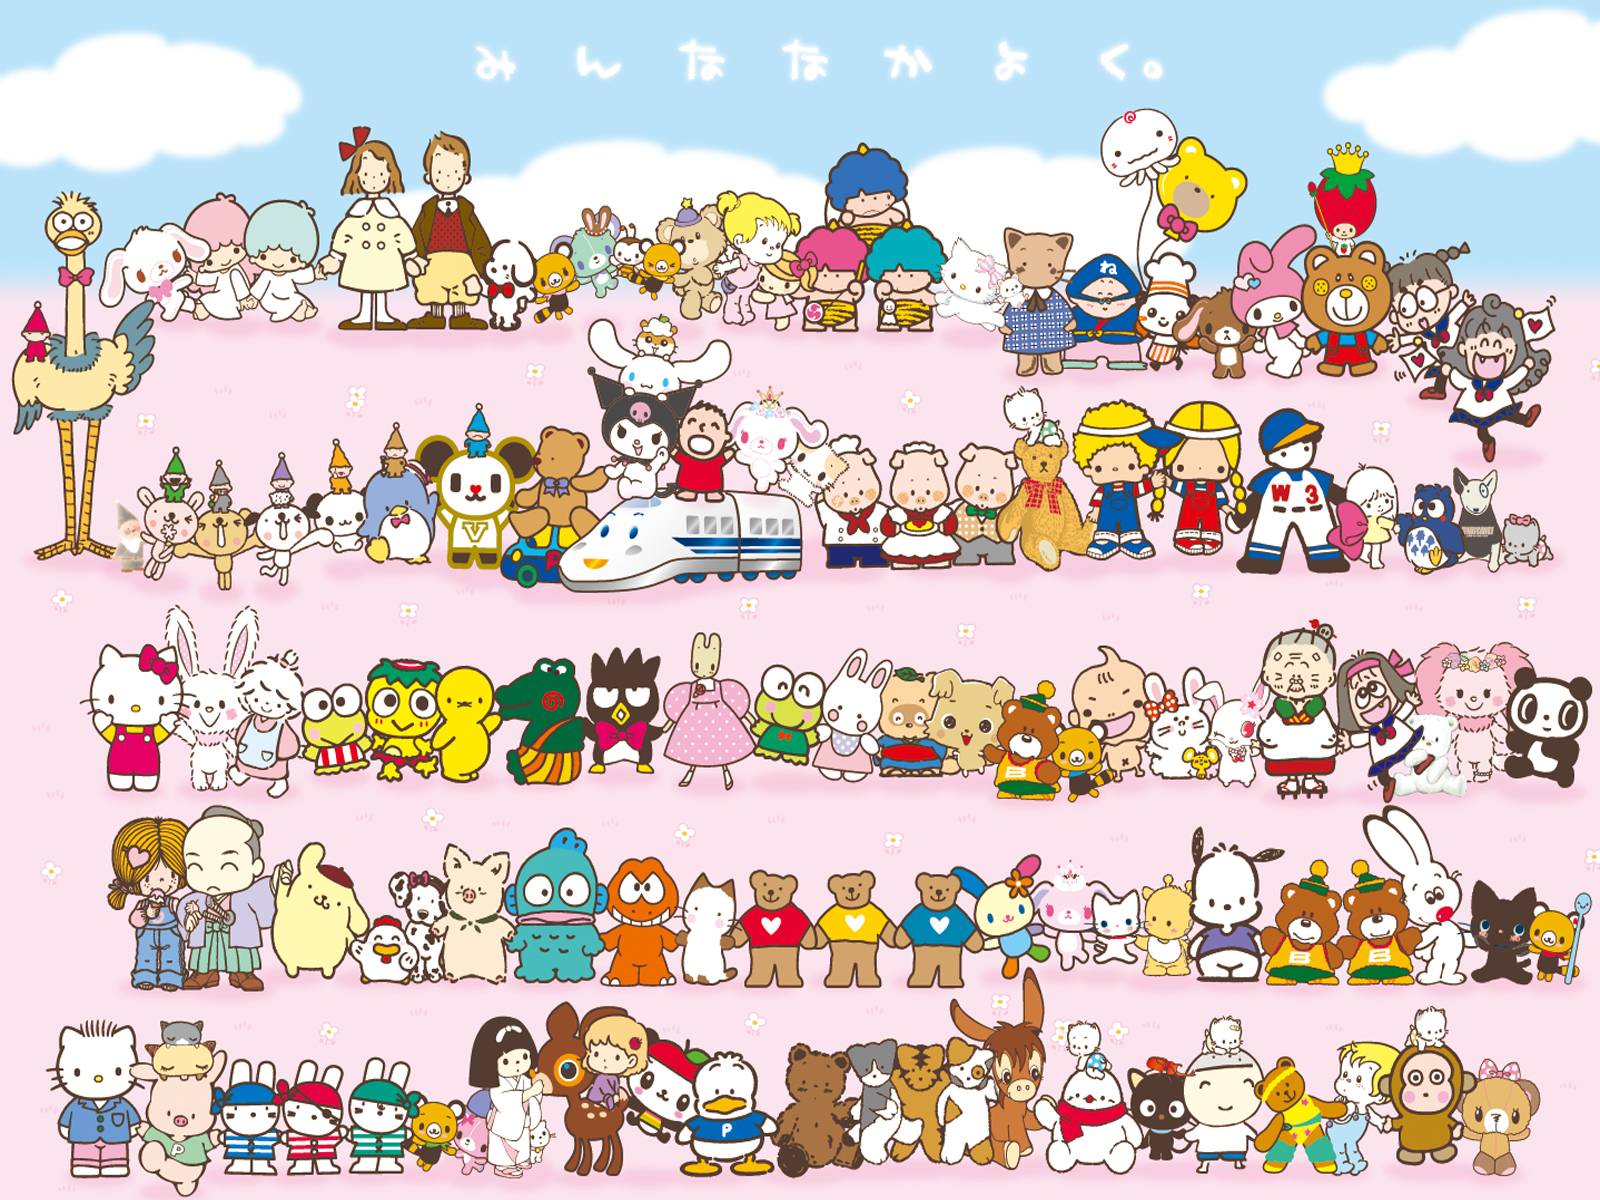 Free Download 1236 Hello Kitty All Sanrio Wallpaperjpg 1600x10 For Your Desktop Mobile Tablet Explore 77 Sanrio Wallpapers Hello Kitty Pictures Wallpaper Sanrio Desktop Wallpaper Sanrio Wallpaper Free Download